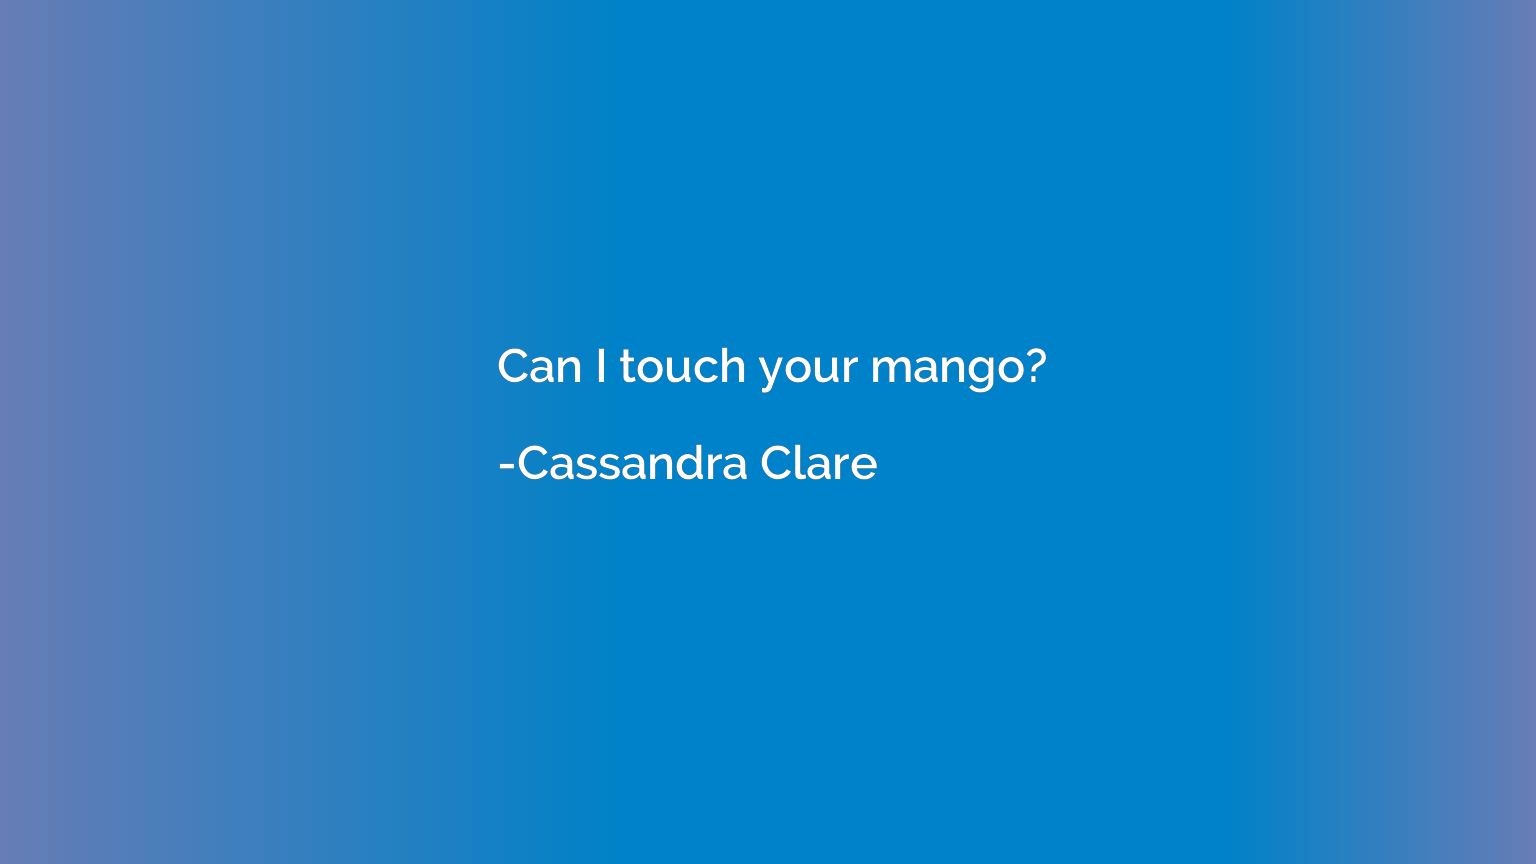 Can I touch your mango?